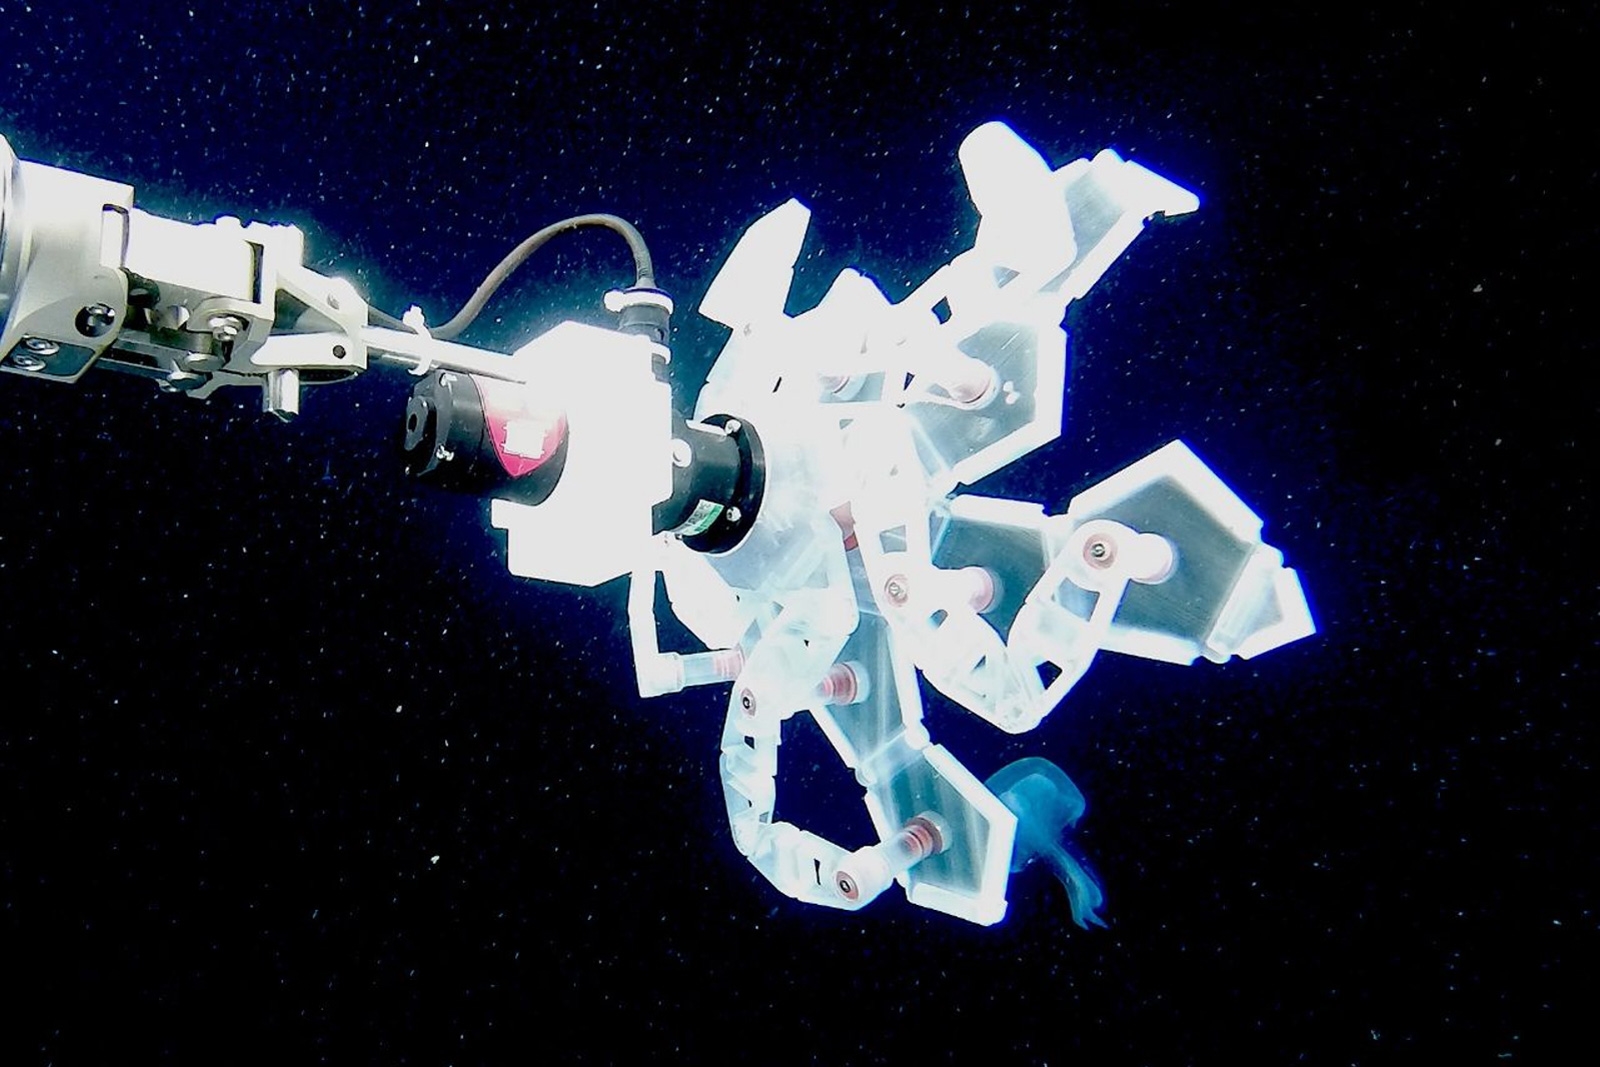 Harvard's robot arm can grab squishy sea animals without hurting them | DeviceDaily.com